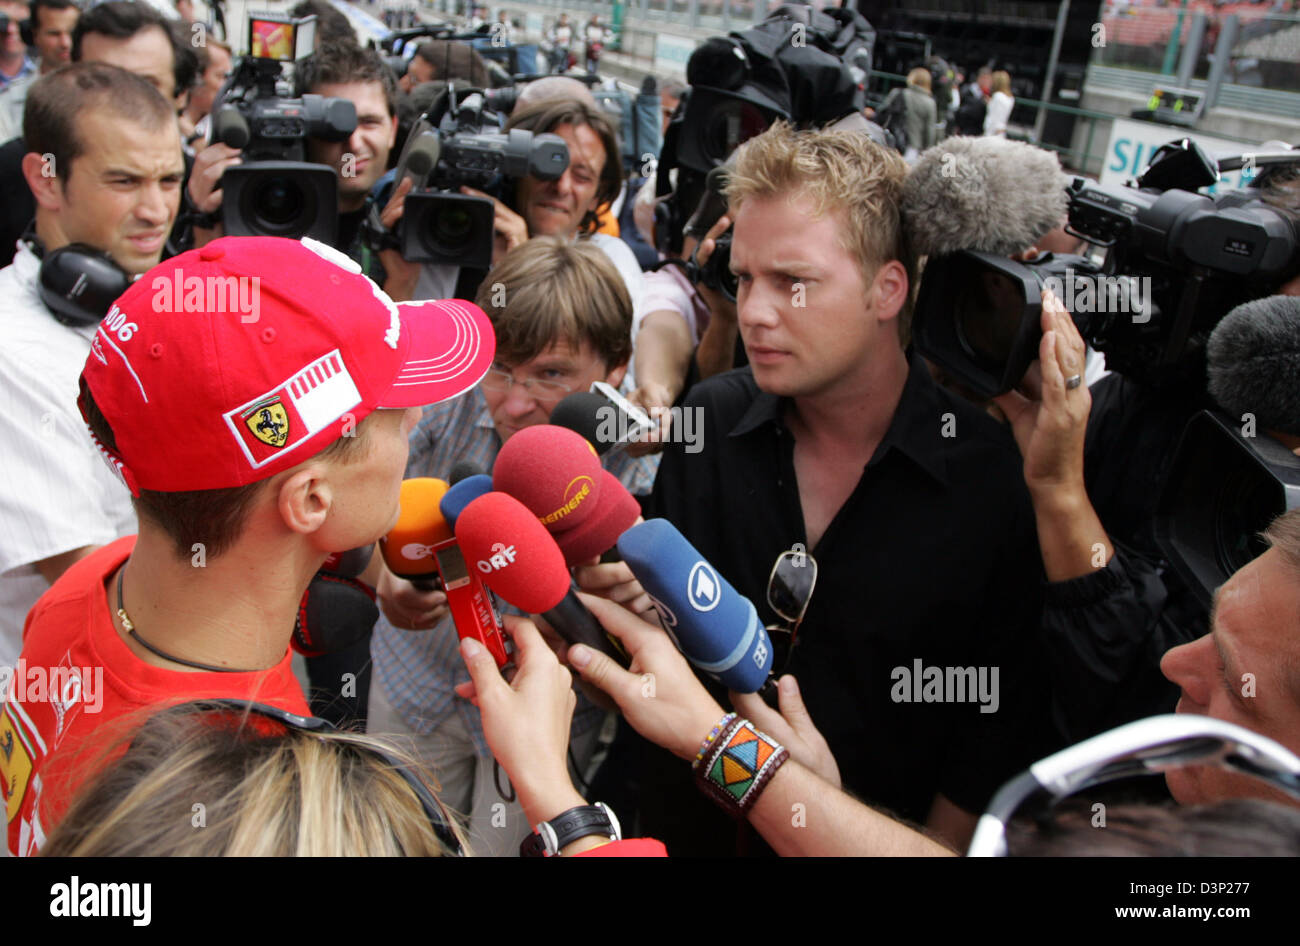 German Formula One driver Michael Schumacher (L) of team Scuderia Ferrari answers journalists' questions after the third practice session of the 2006 Hungarian Grand Prix at the Hungaroring racetrack near Budapest, Hungary, Saturday, 05 August 2006. Schumacher was docked two seconds for overtaking two cars under red flags during Saturday's final practice and lost thereby the pole p Stock Photo